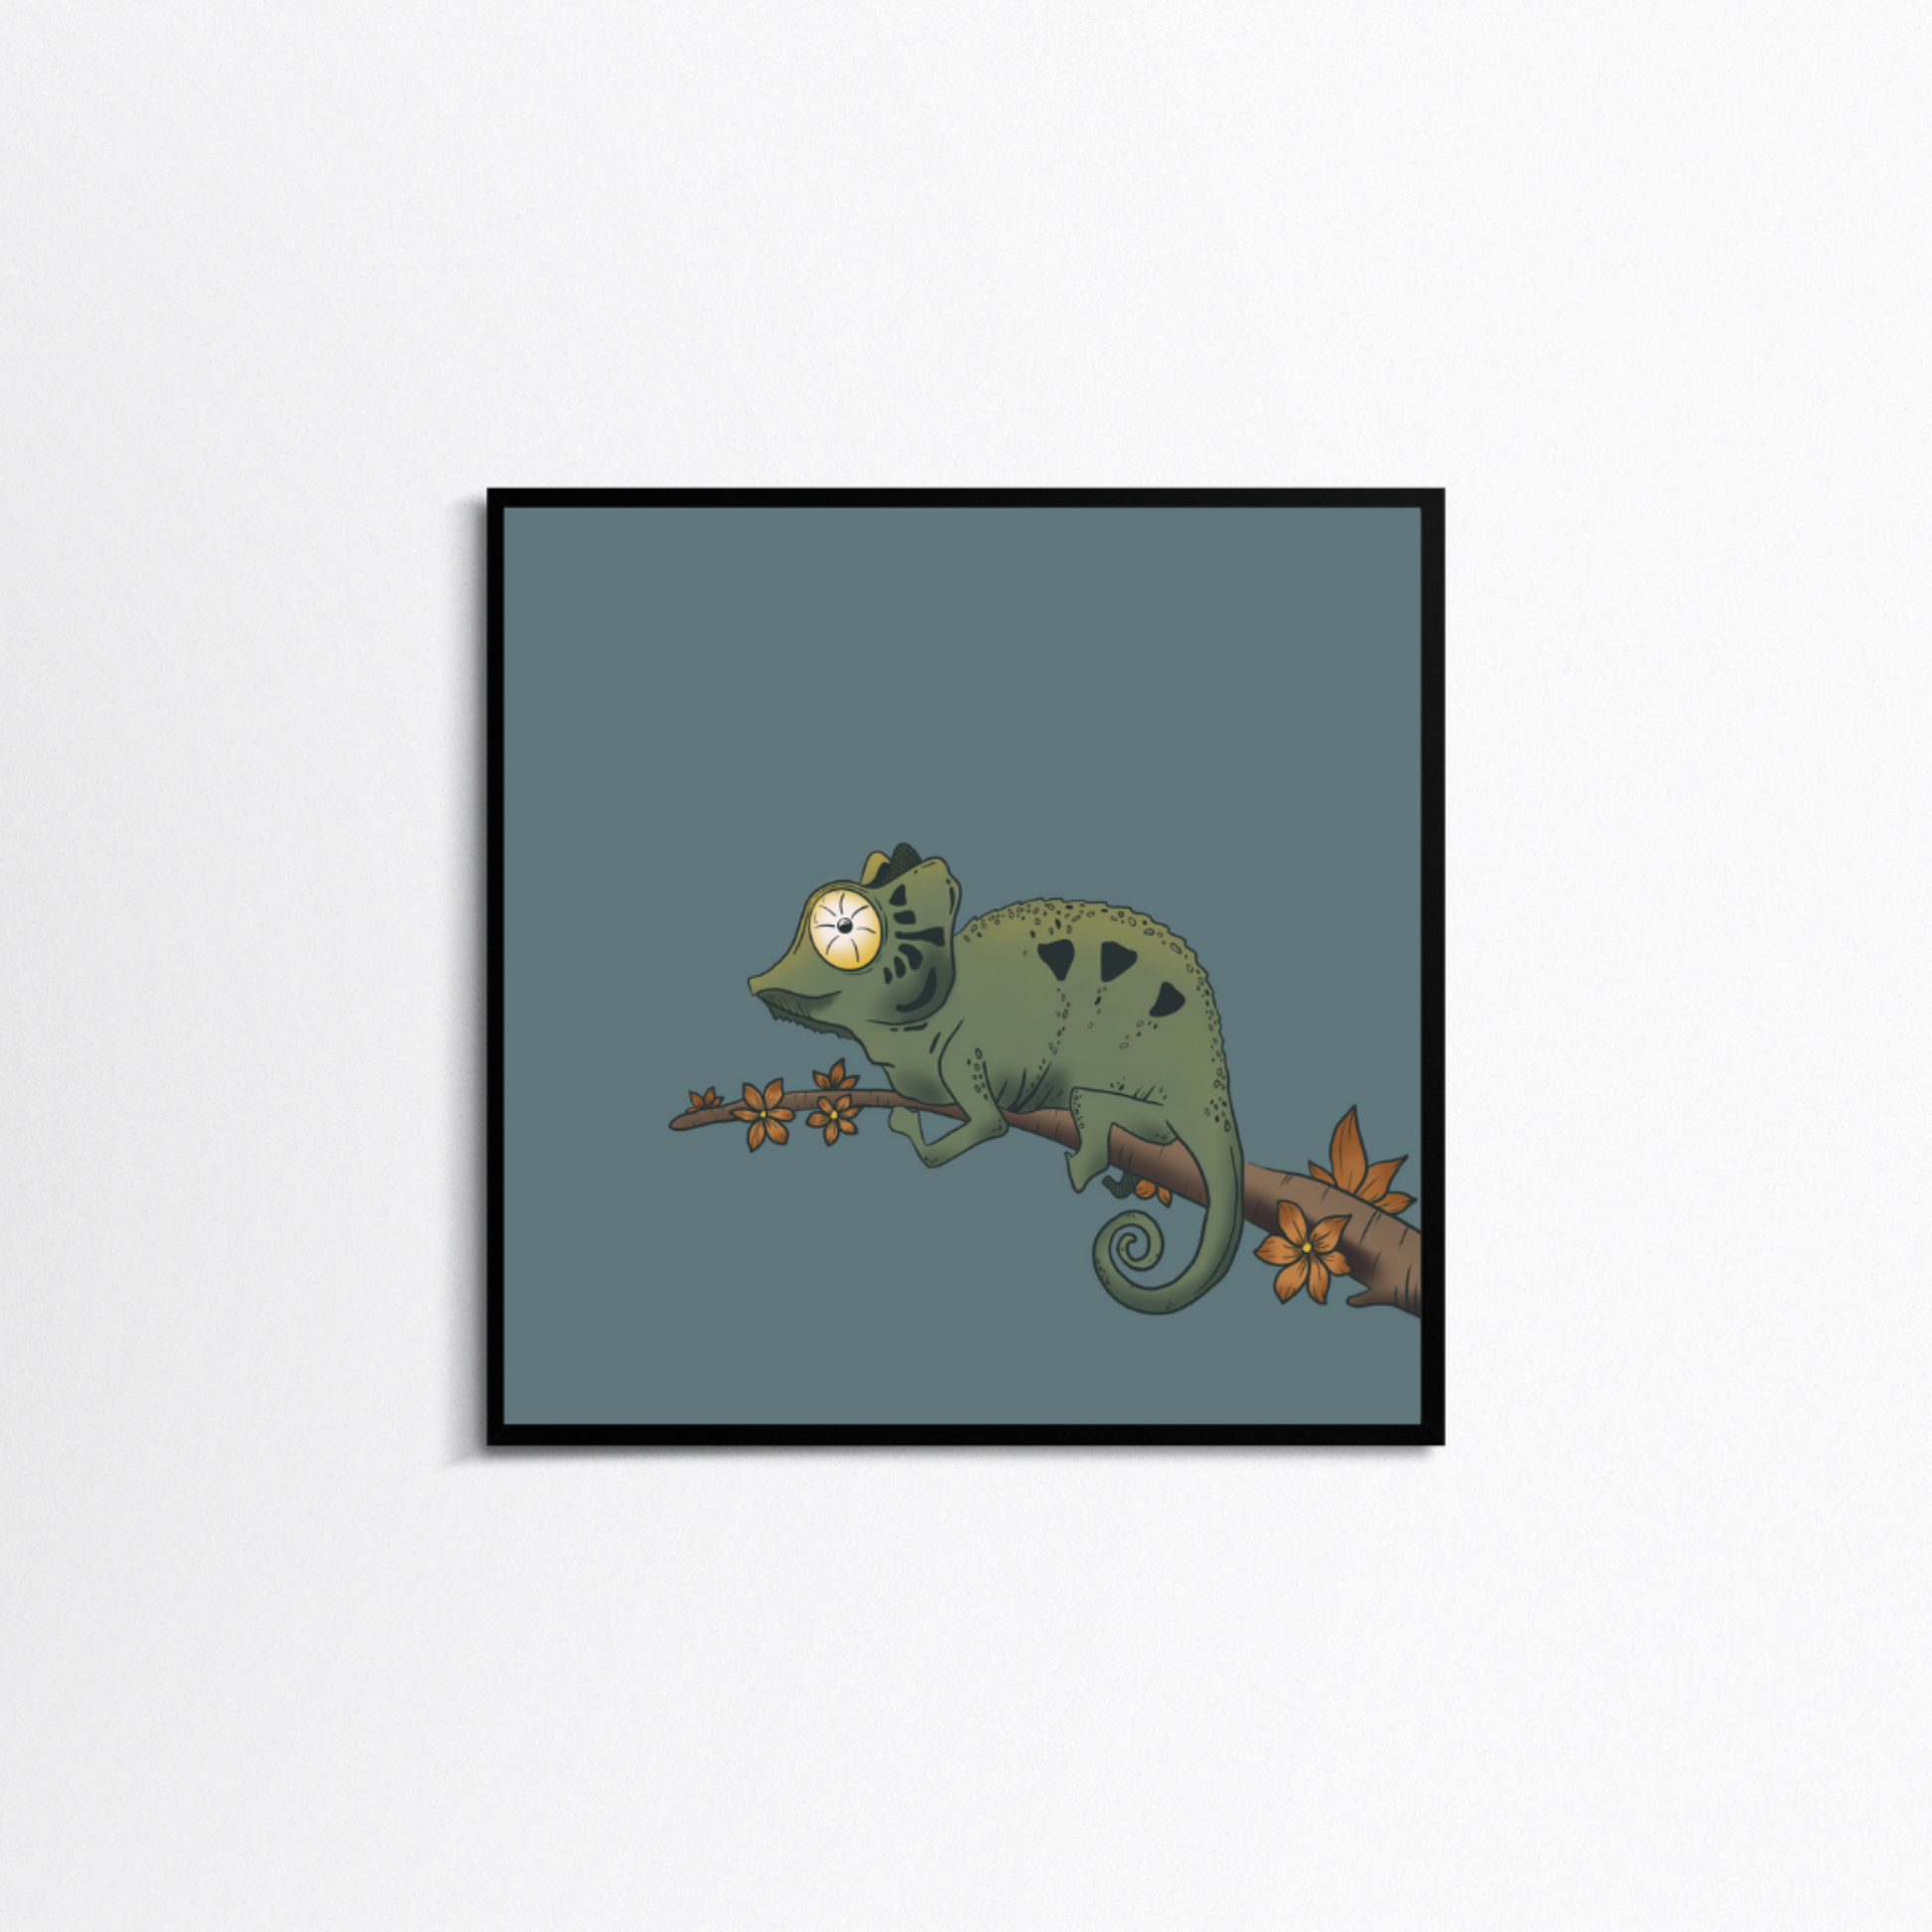 White background with a square black frame. In the frame is a print with a pale blue background with a green chameleon on a brown branch with blooming orange flowers.